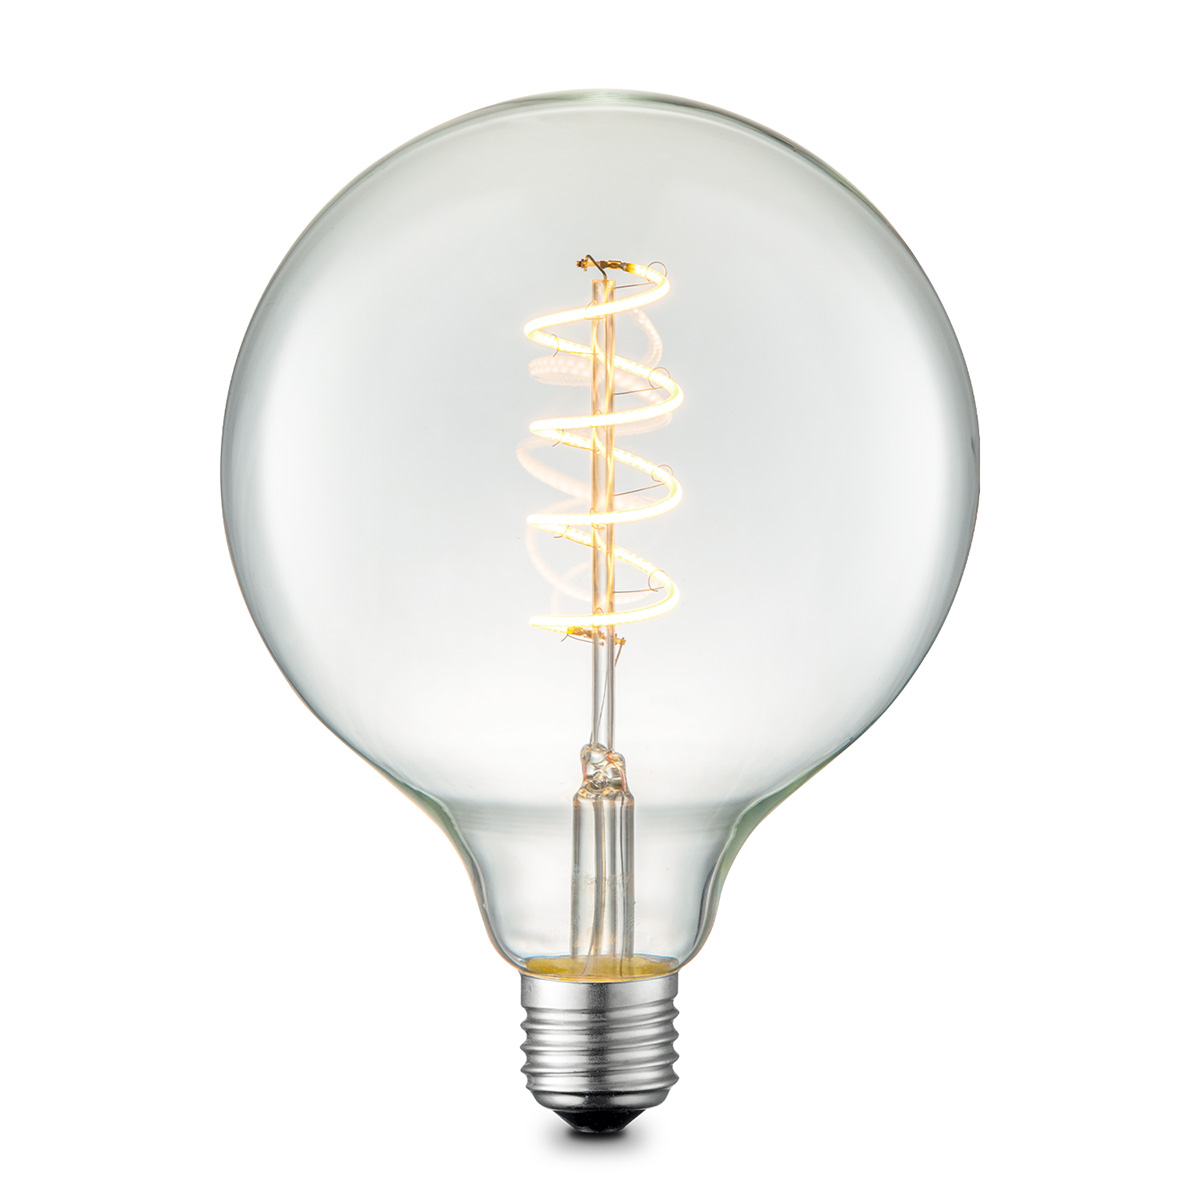 Tangla lighting - TLB-8009-04CL - LED Light Bulb Single Spiral filament - G125 4W clear - dimmable - E27